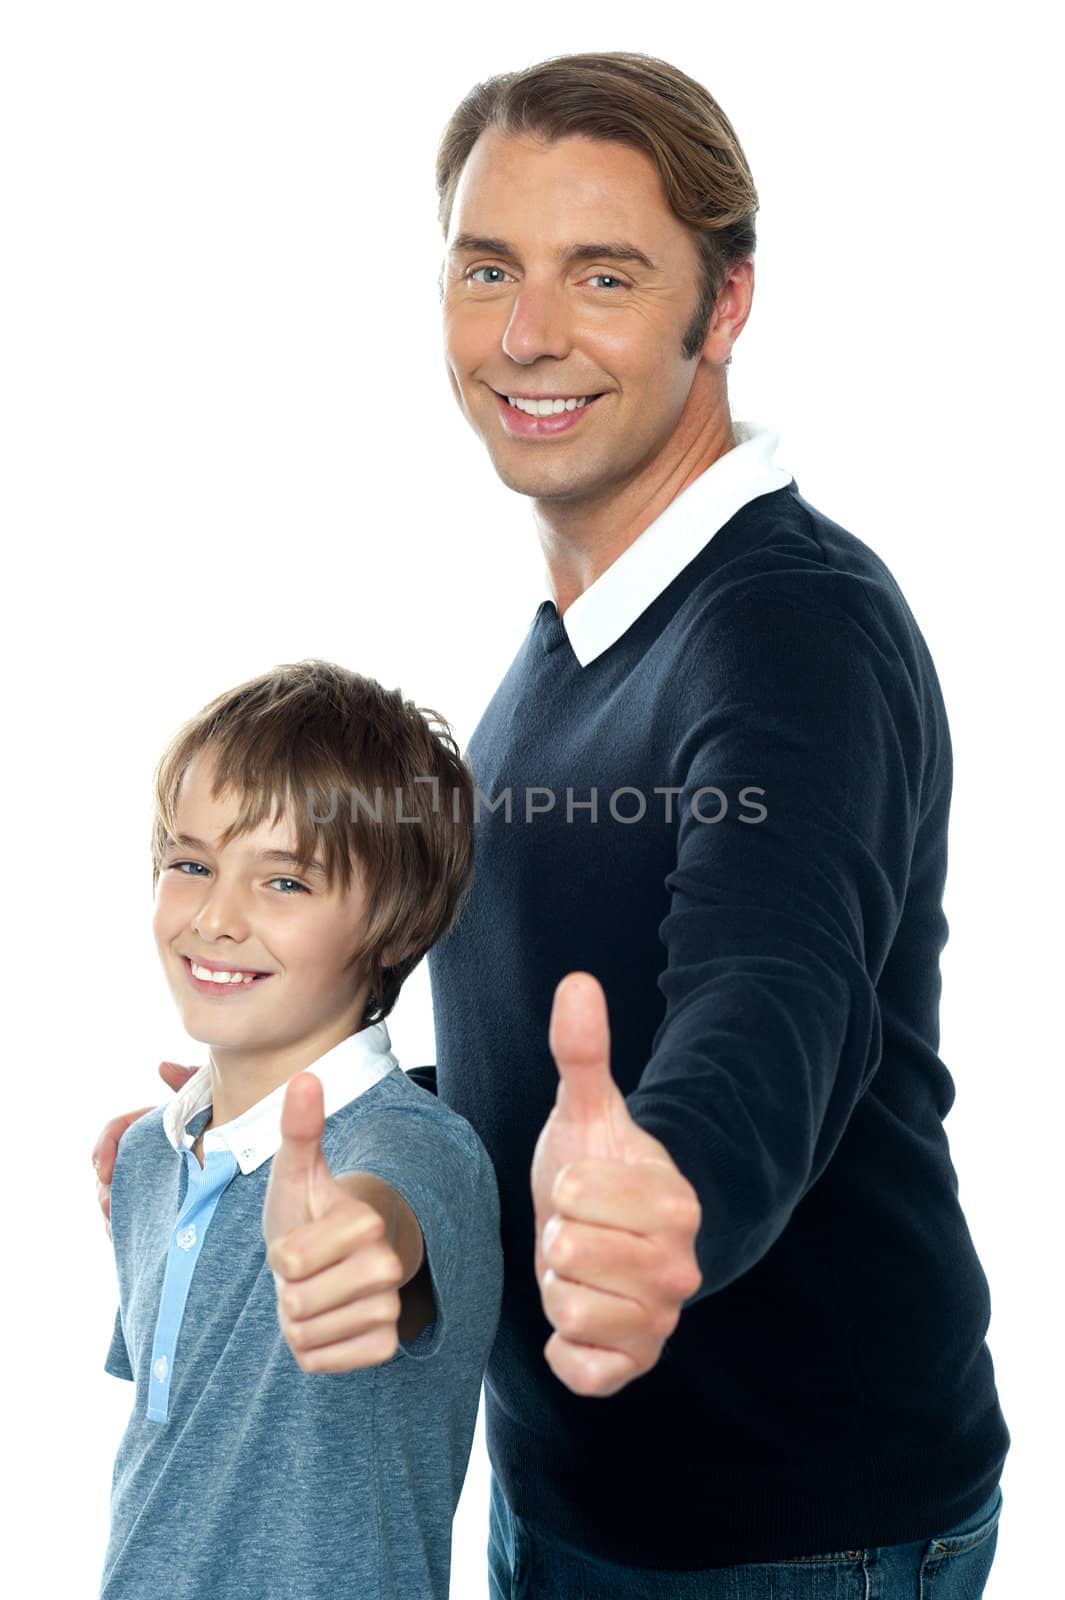 Confident father and son duo  gesturing thumbs up sign. Smiling faces